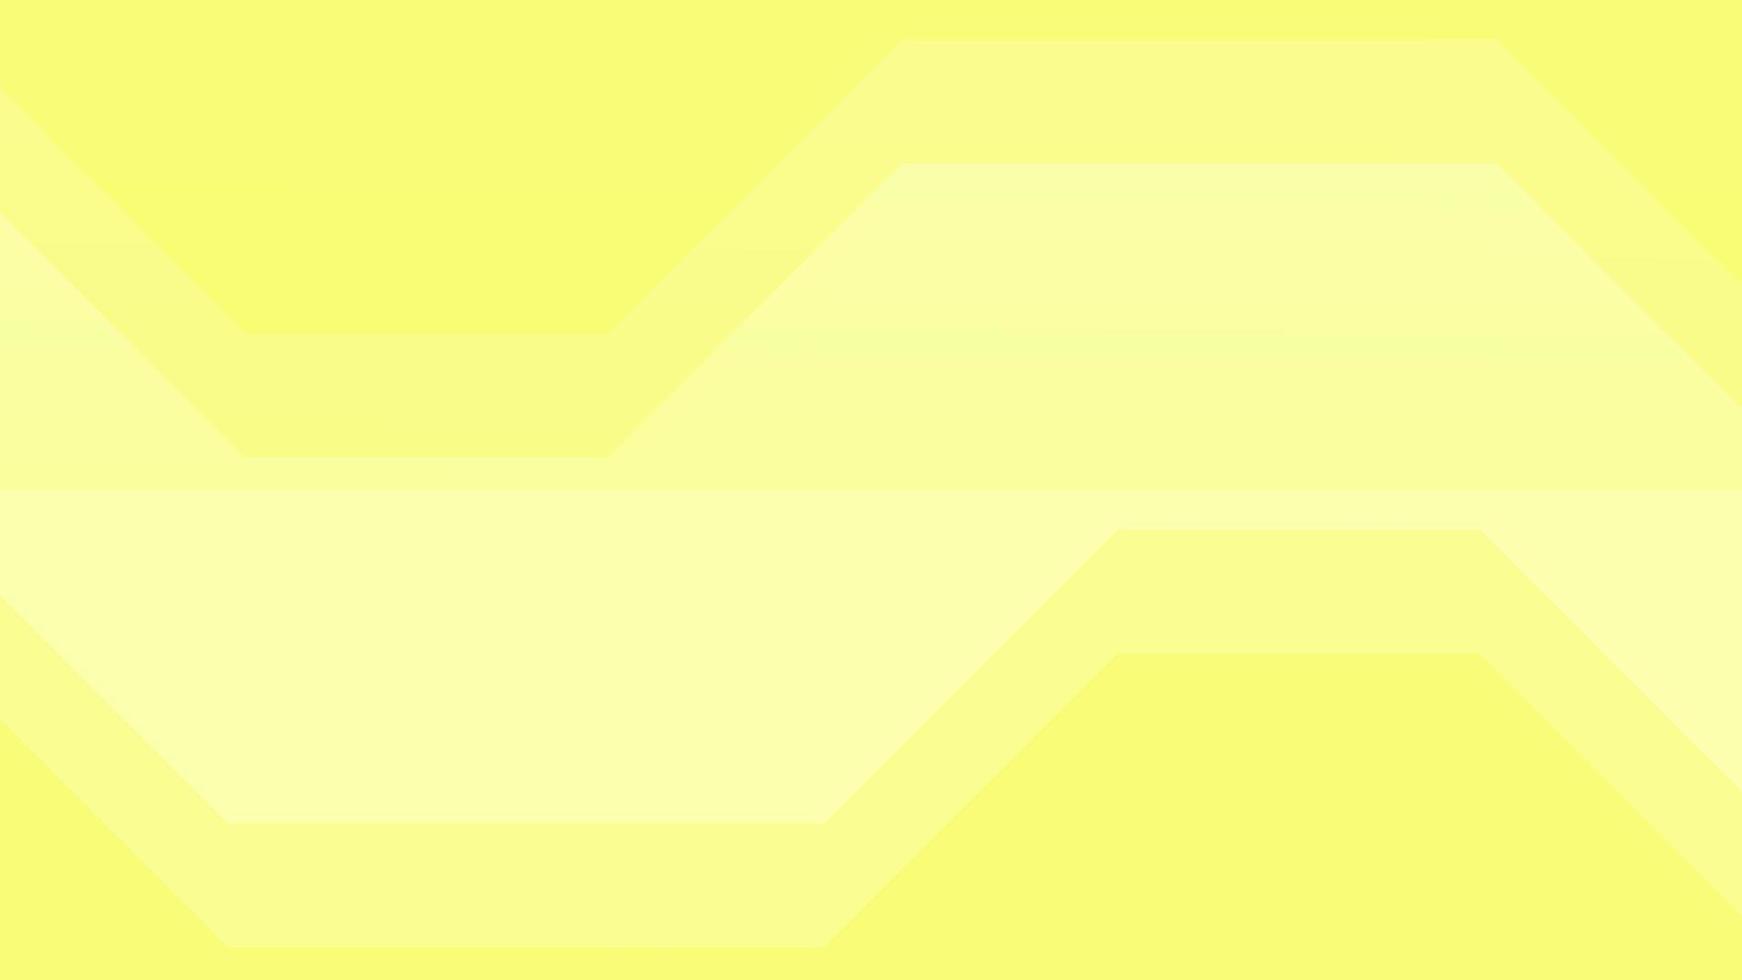 Bright yellow background with transparent. suitable for business, promotion, sale, poster, banner, etc. vector